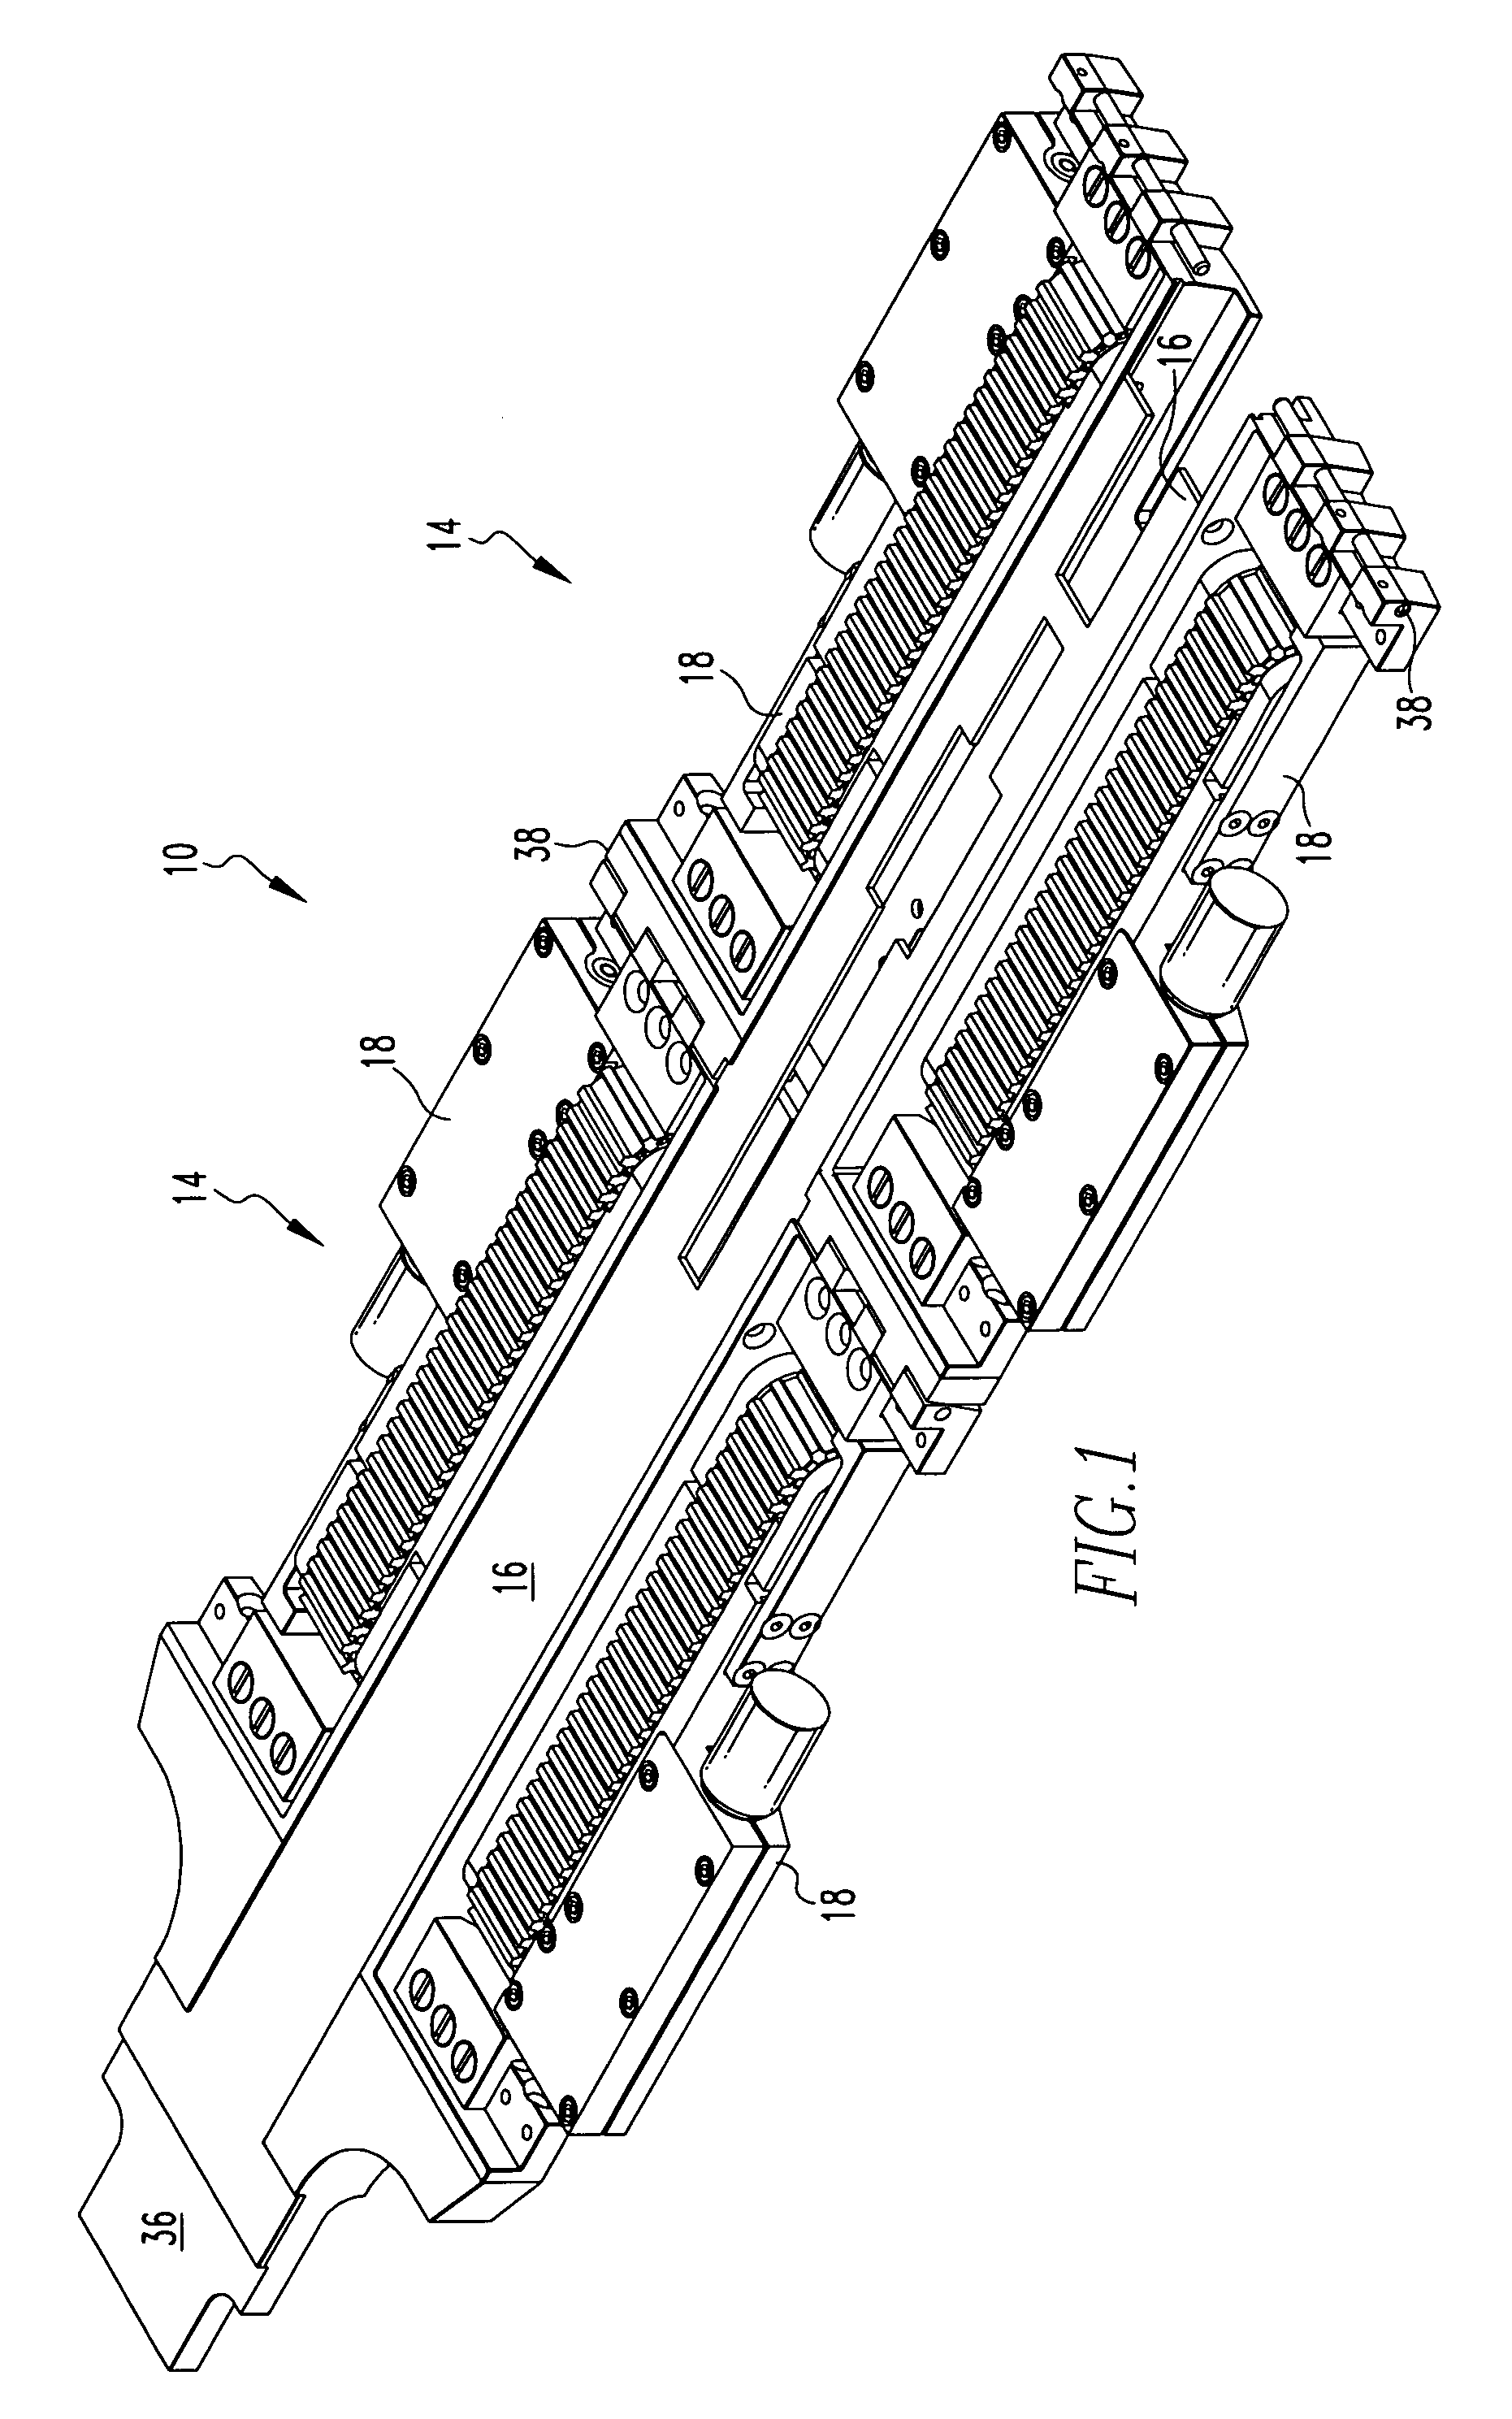 Remote controlled inspection vehicle utilizing magnetic adhesion to traverse nonhorizontal, nonflat, ferromagnetic surfaces